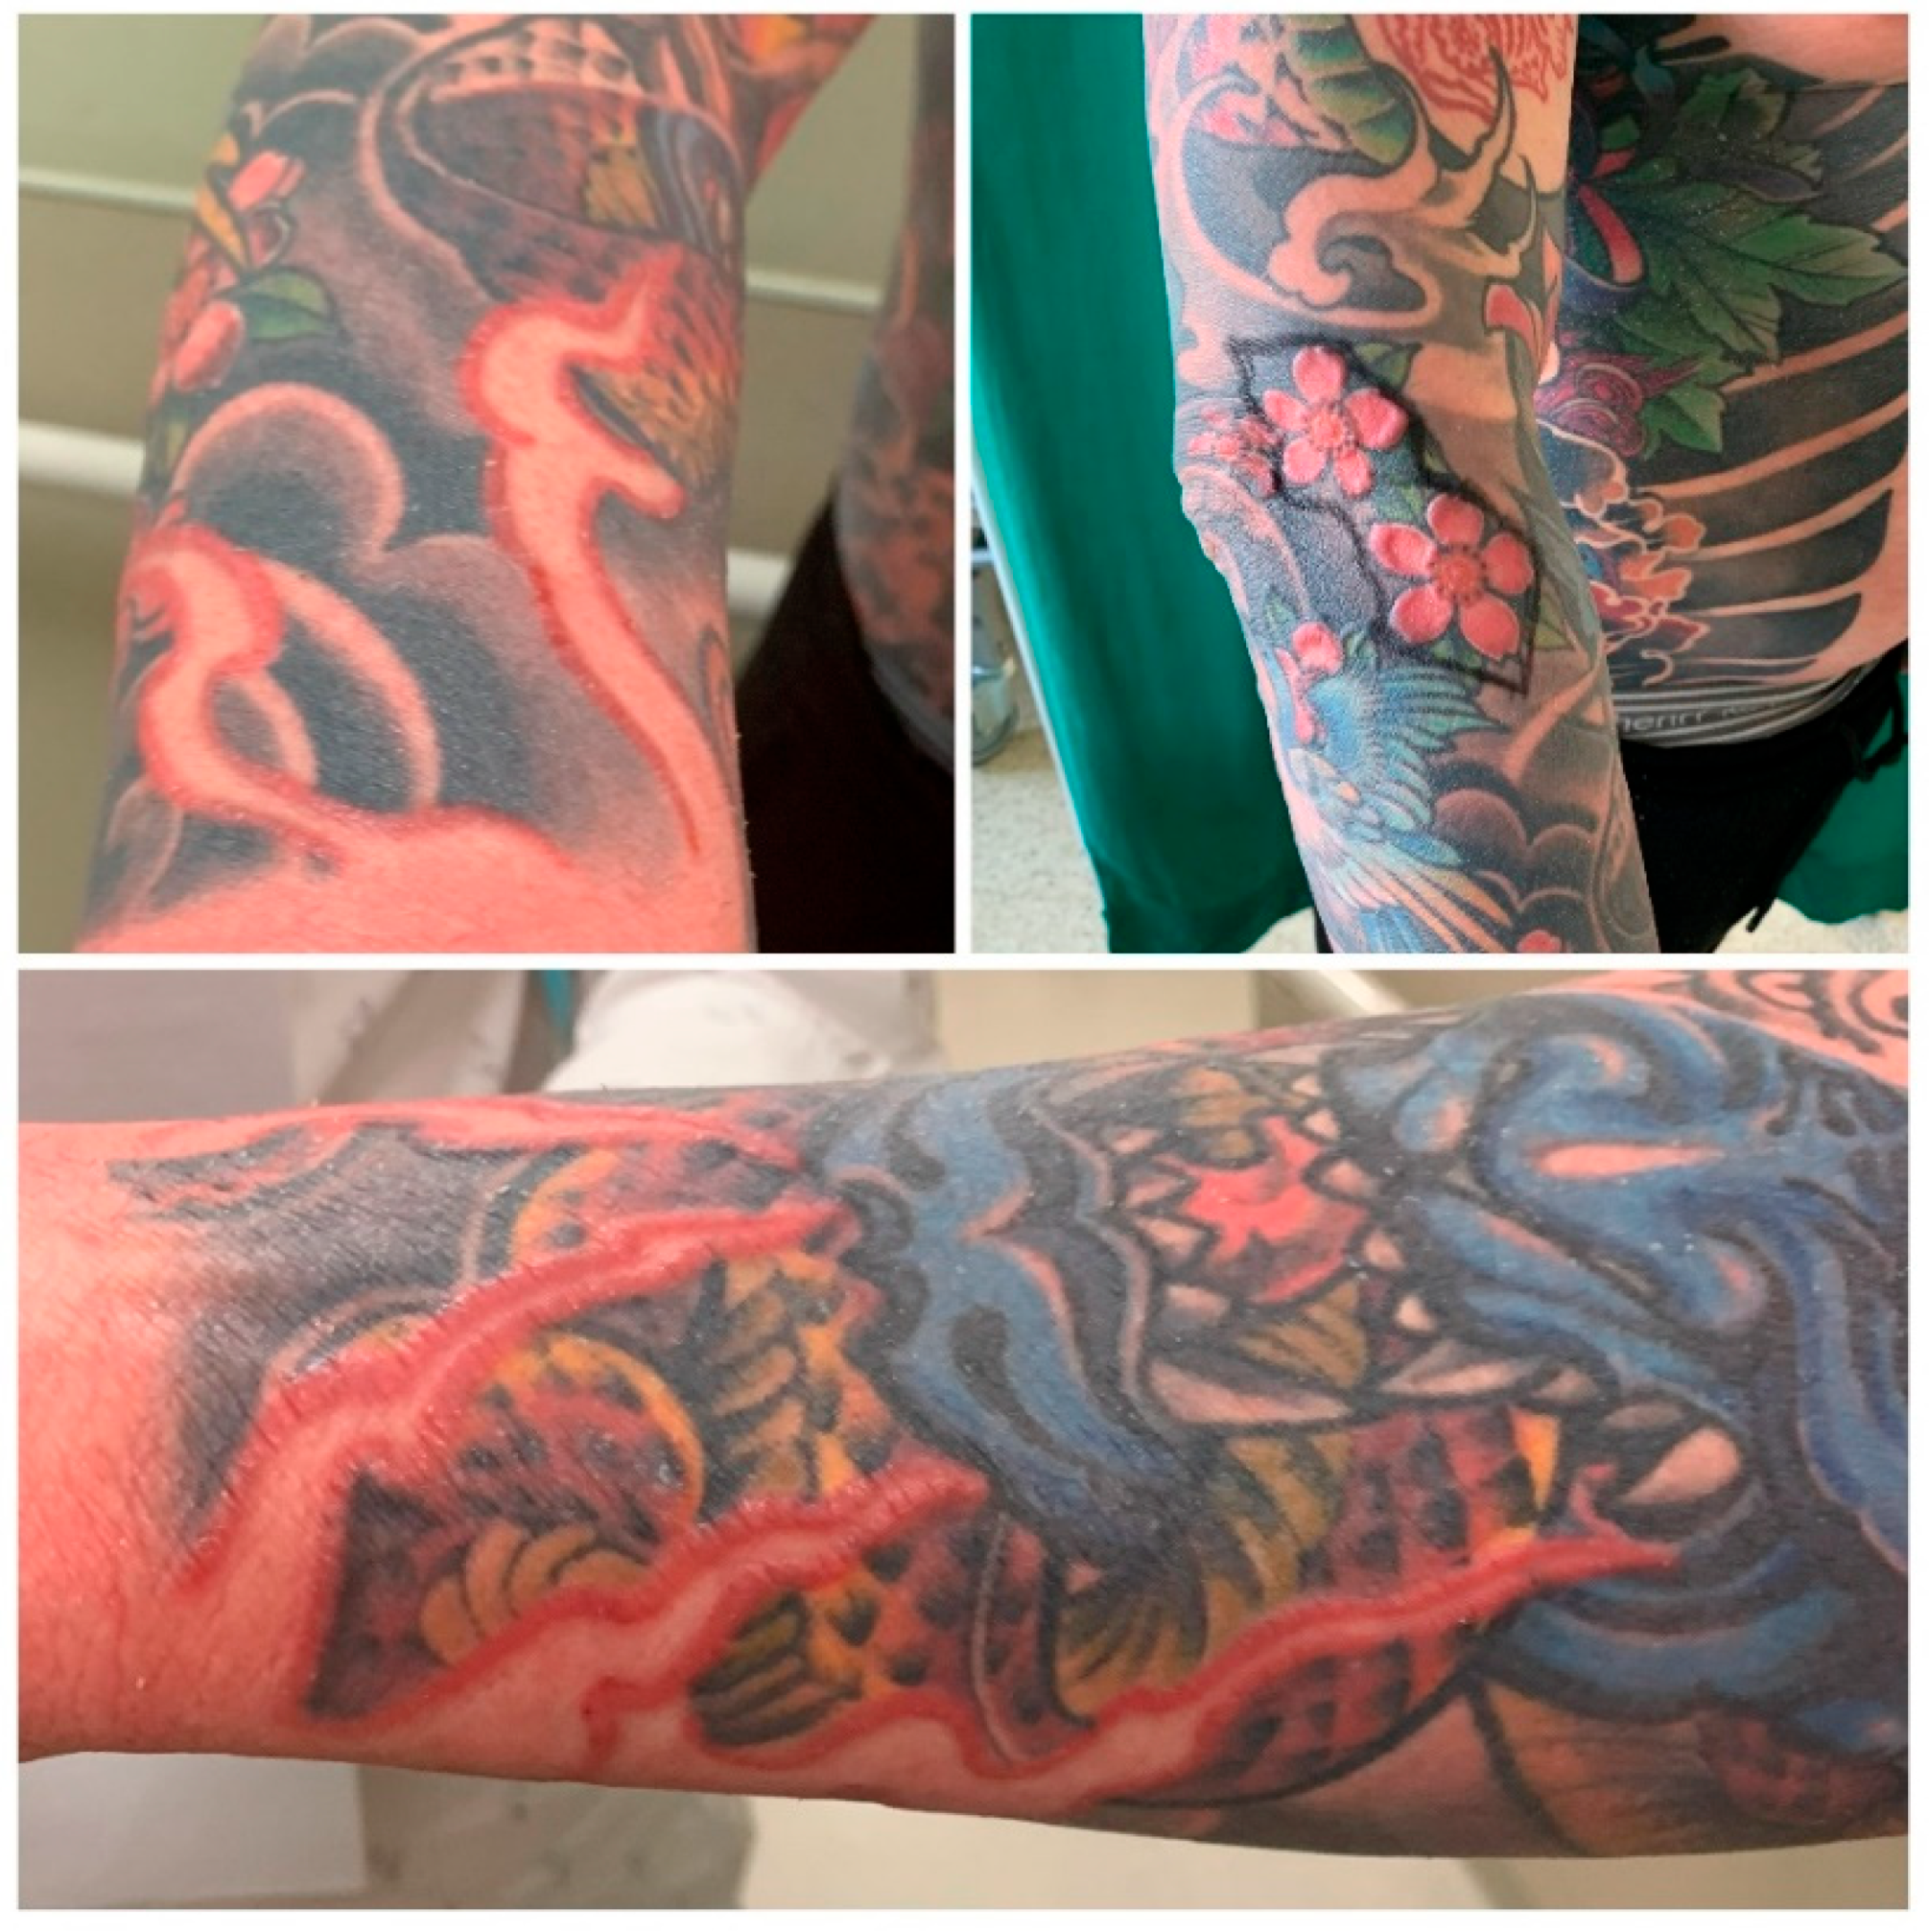 Inflammation occurring in the red ink portion of a tattoo. Reaction to